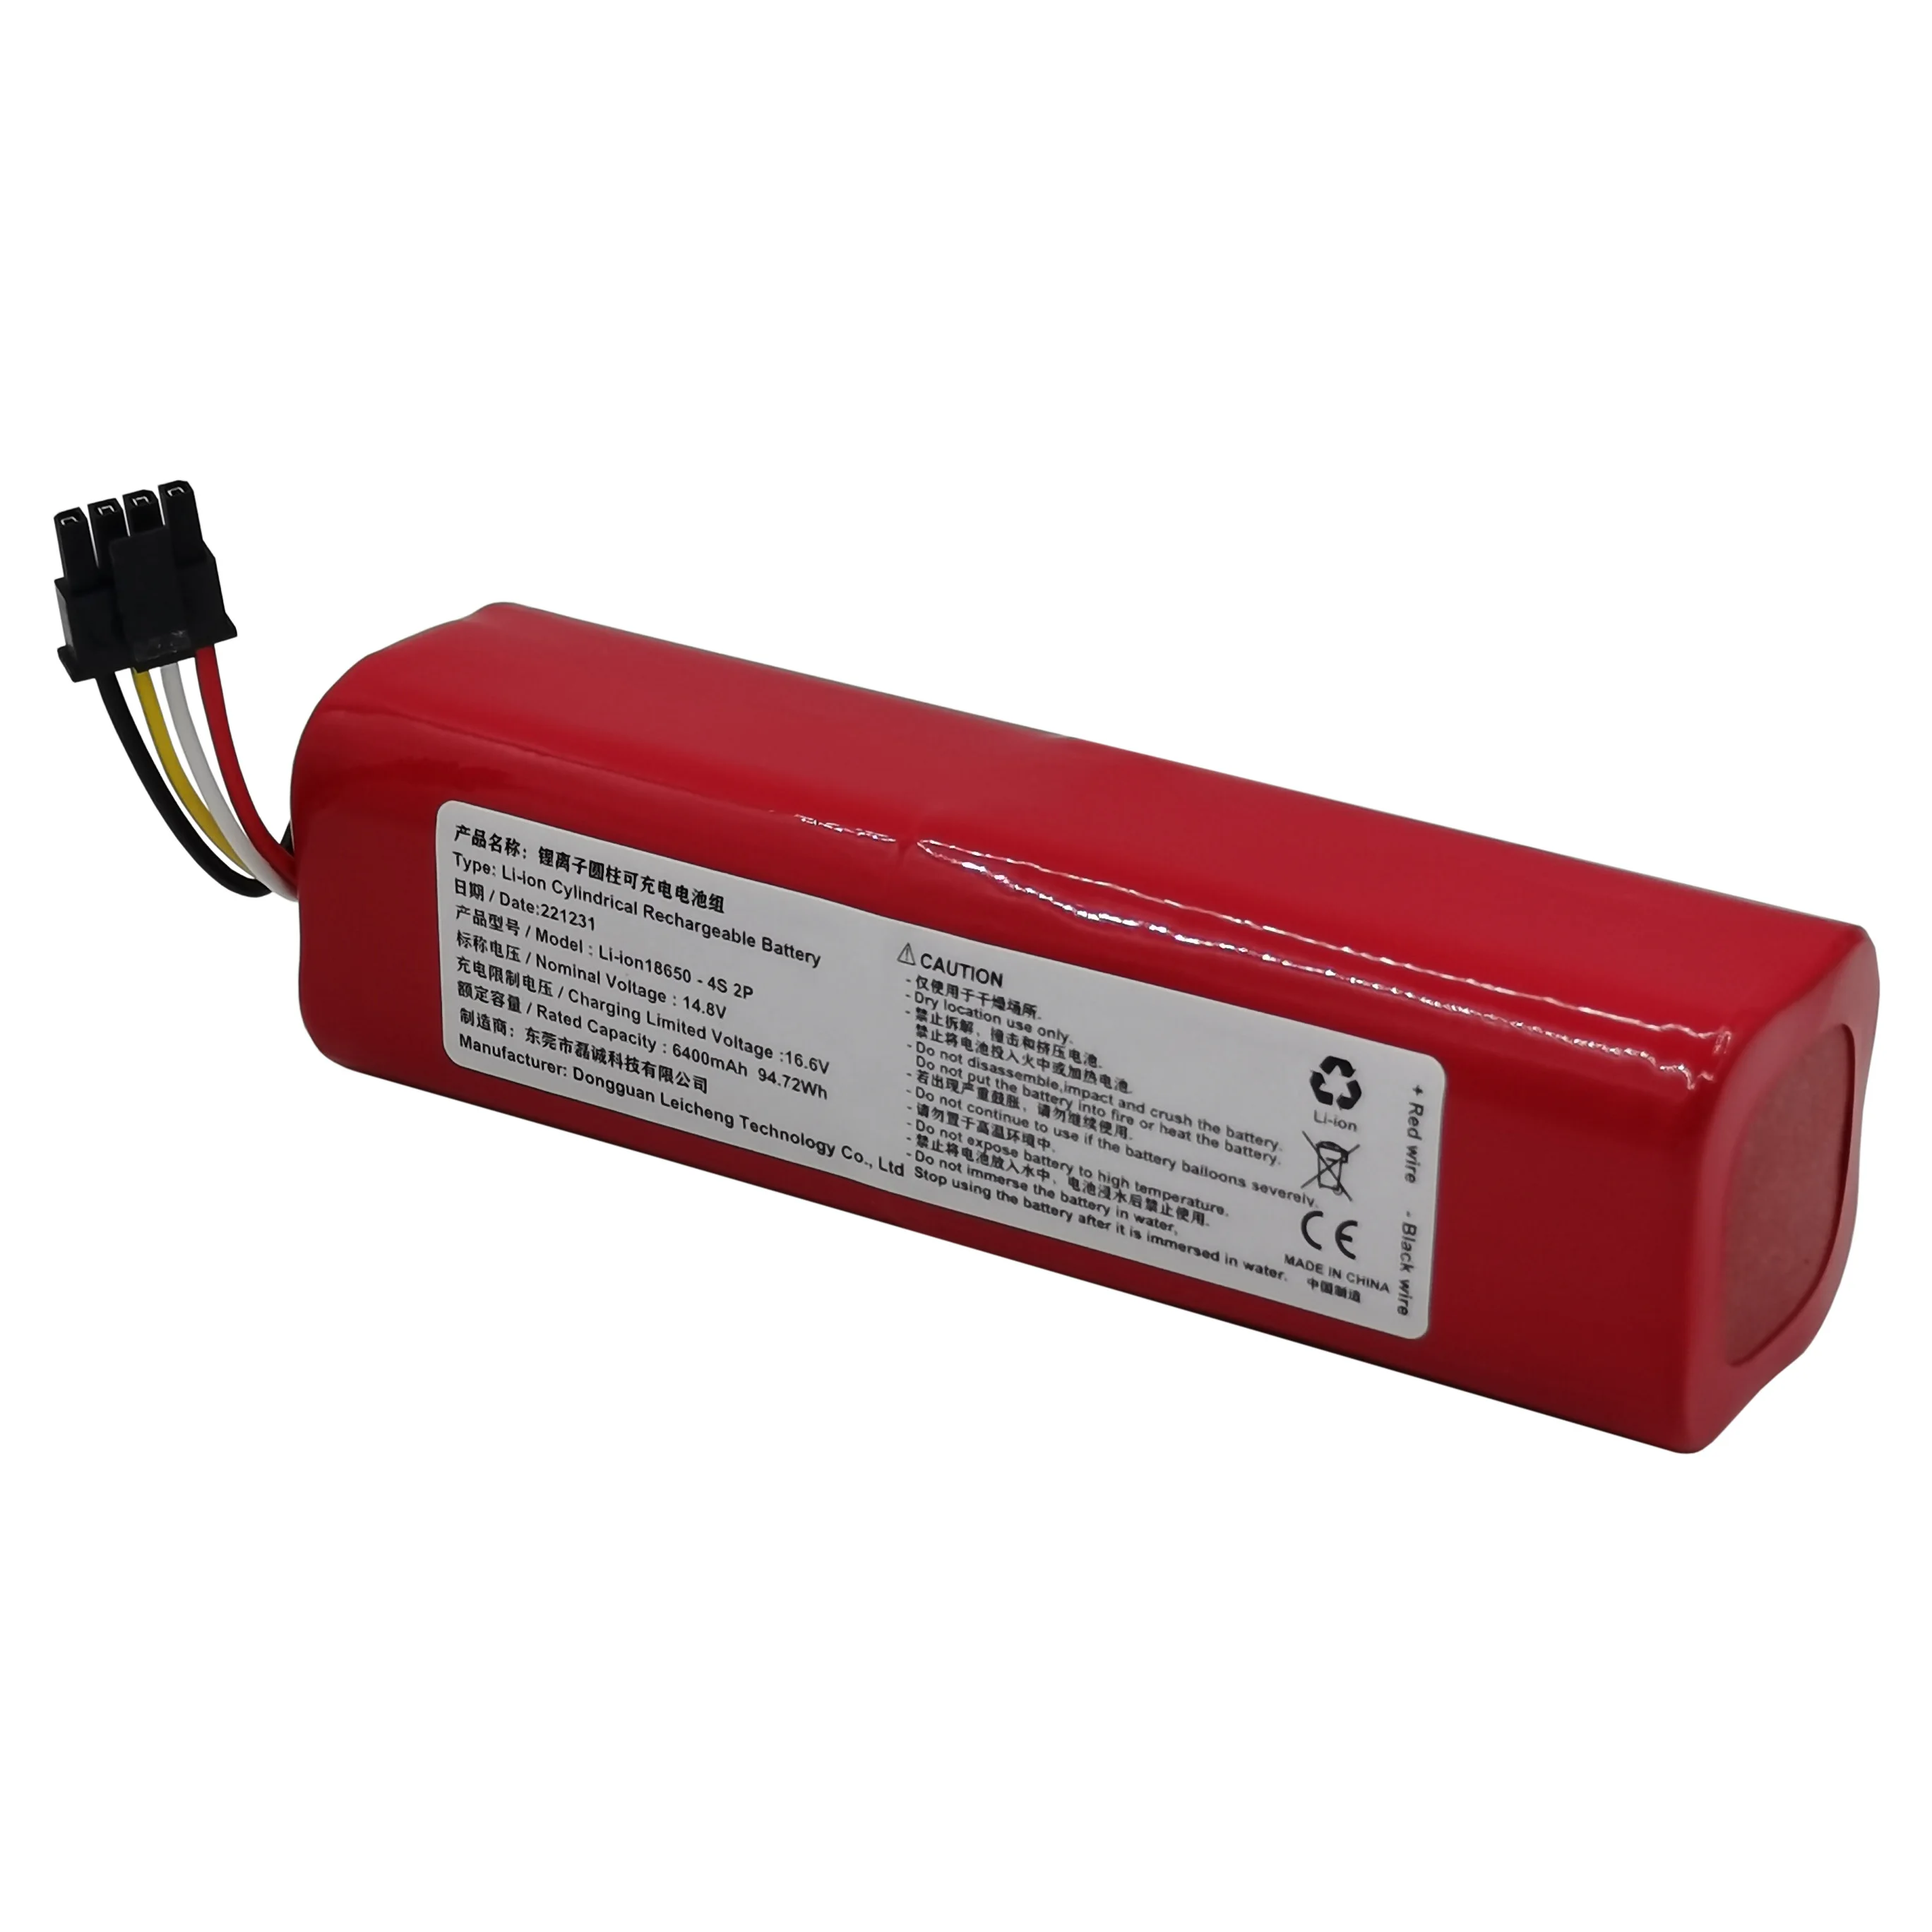 

14.4V 14.8V 6400mAh 7000mAh Li-Ion Cylindrical Rechargeable Battery Pack For Xiaomi Robot Vacuum 1T Cleaner 1st Generation 1S T4